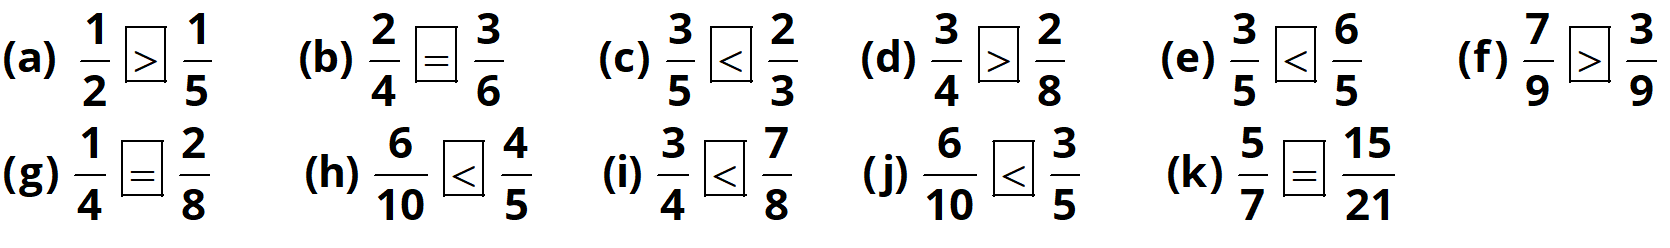 NCERT Solutions for Class 6 Maths, Chapter 7, Fractions, Exercise 7.4 q.5